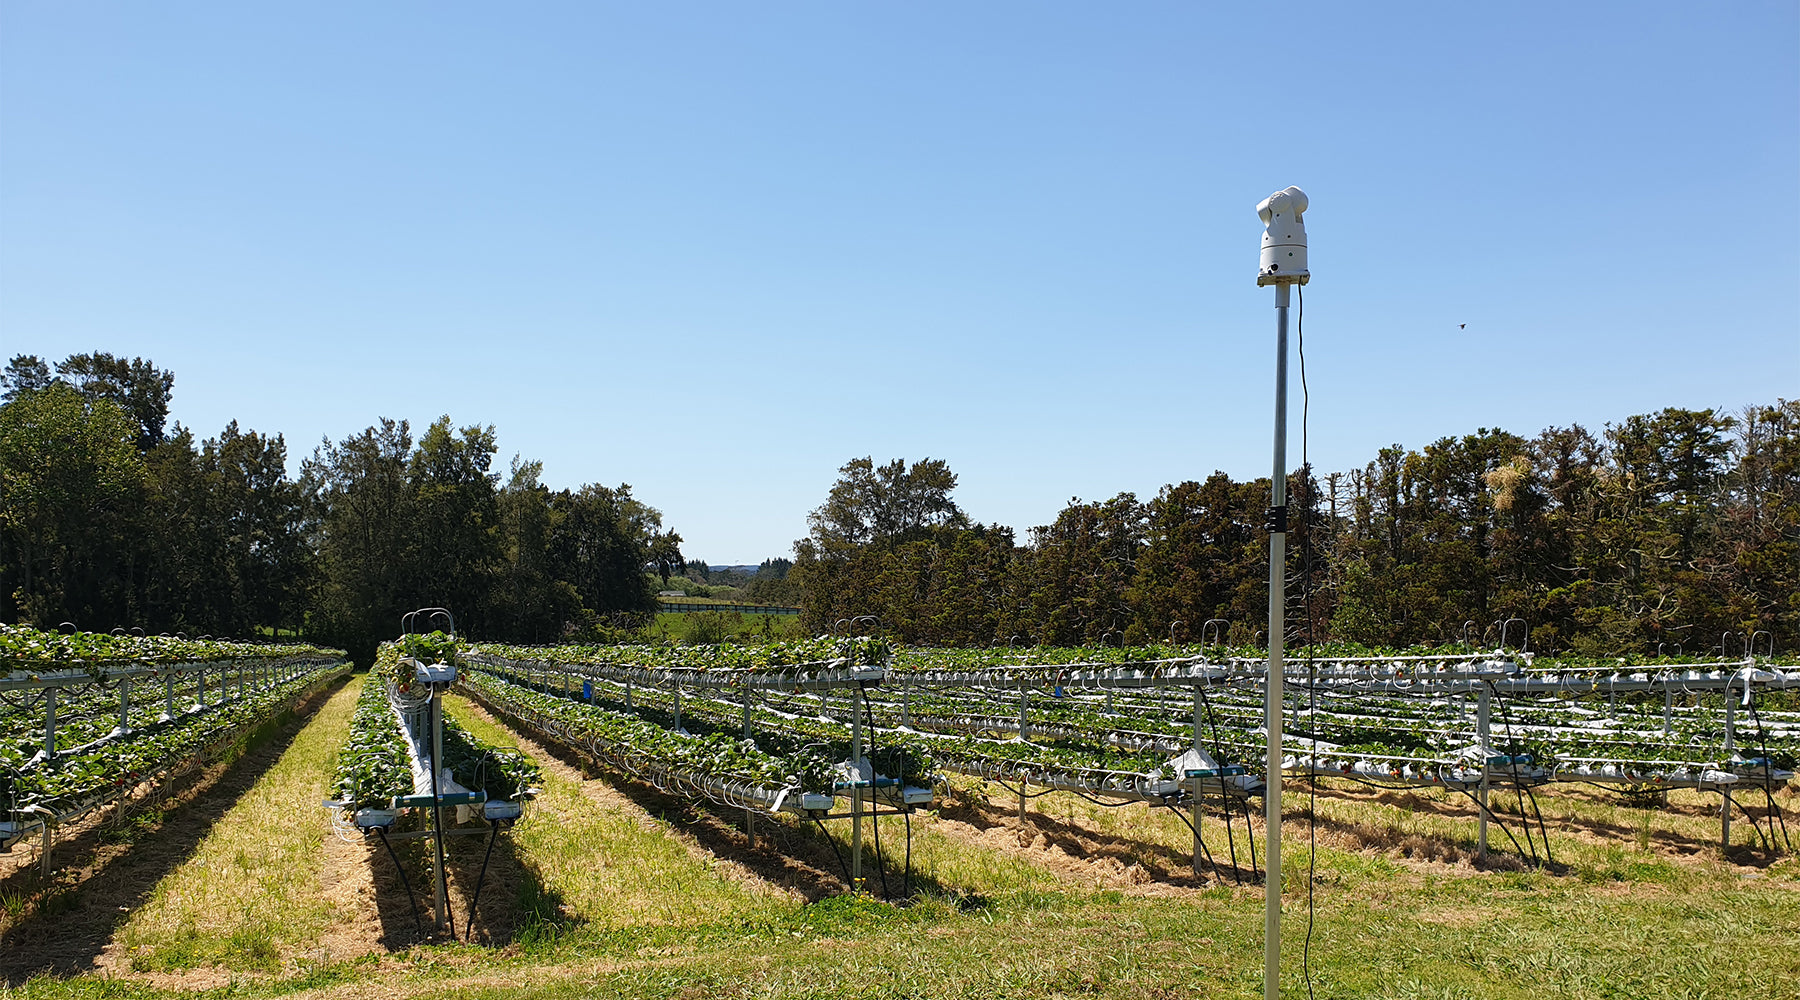 Laser bird deterrents for crops and vineyards – it’s now a reality